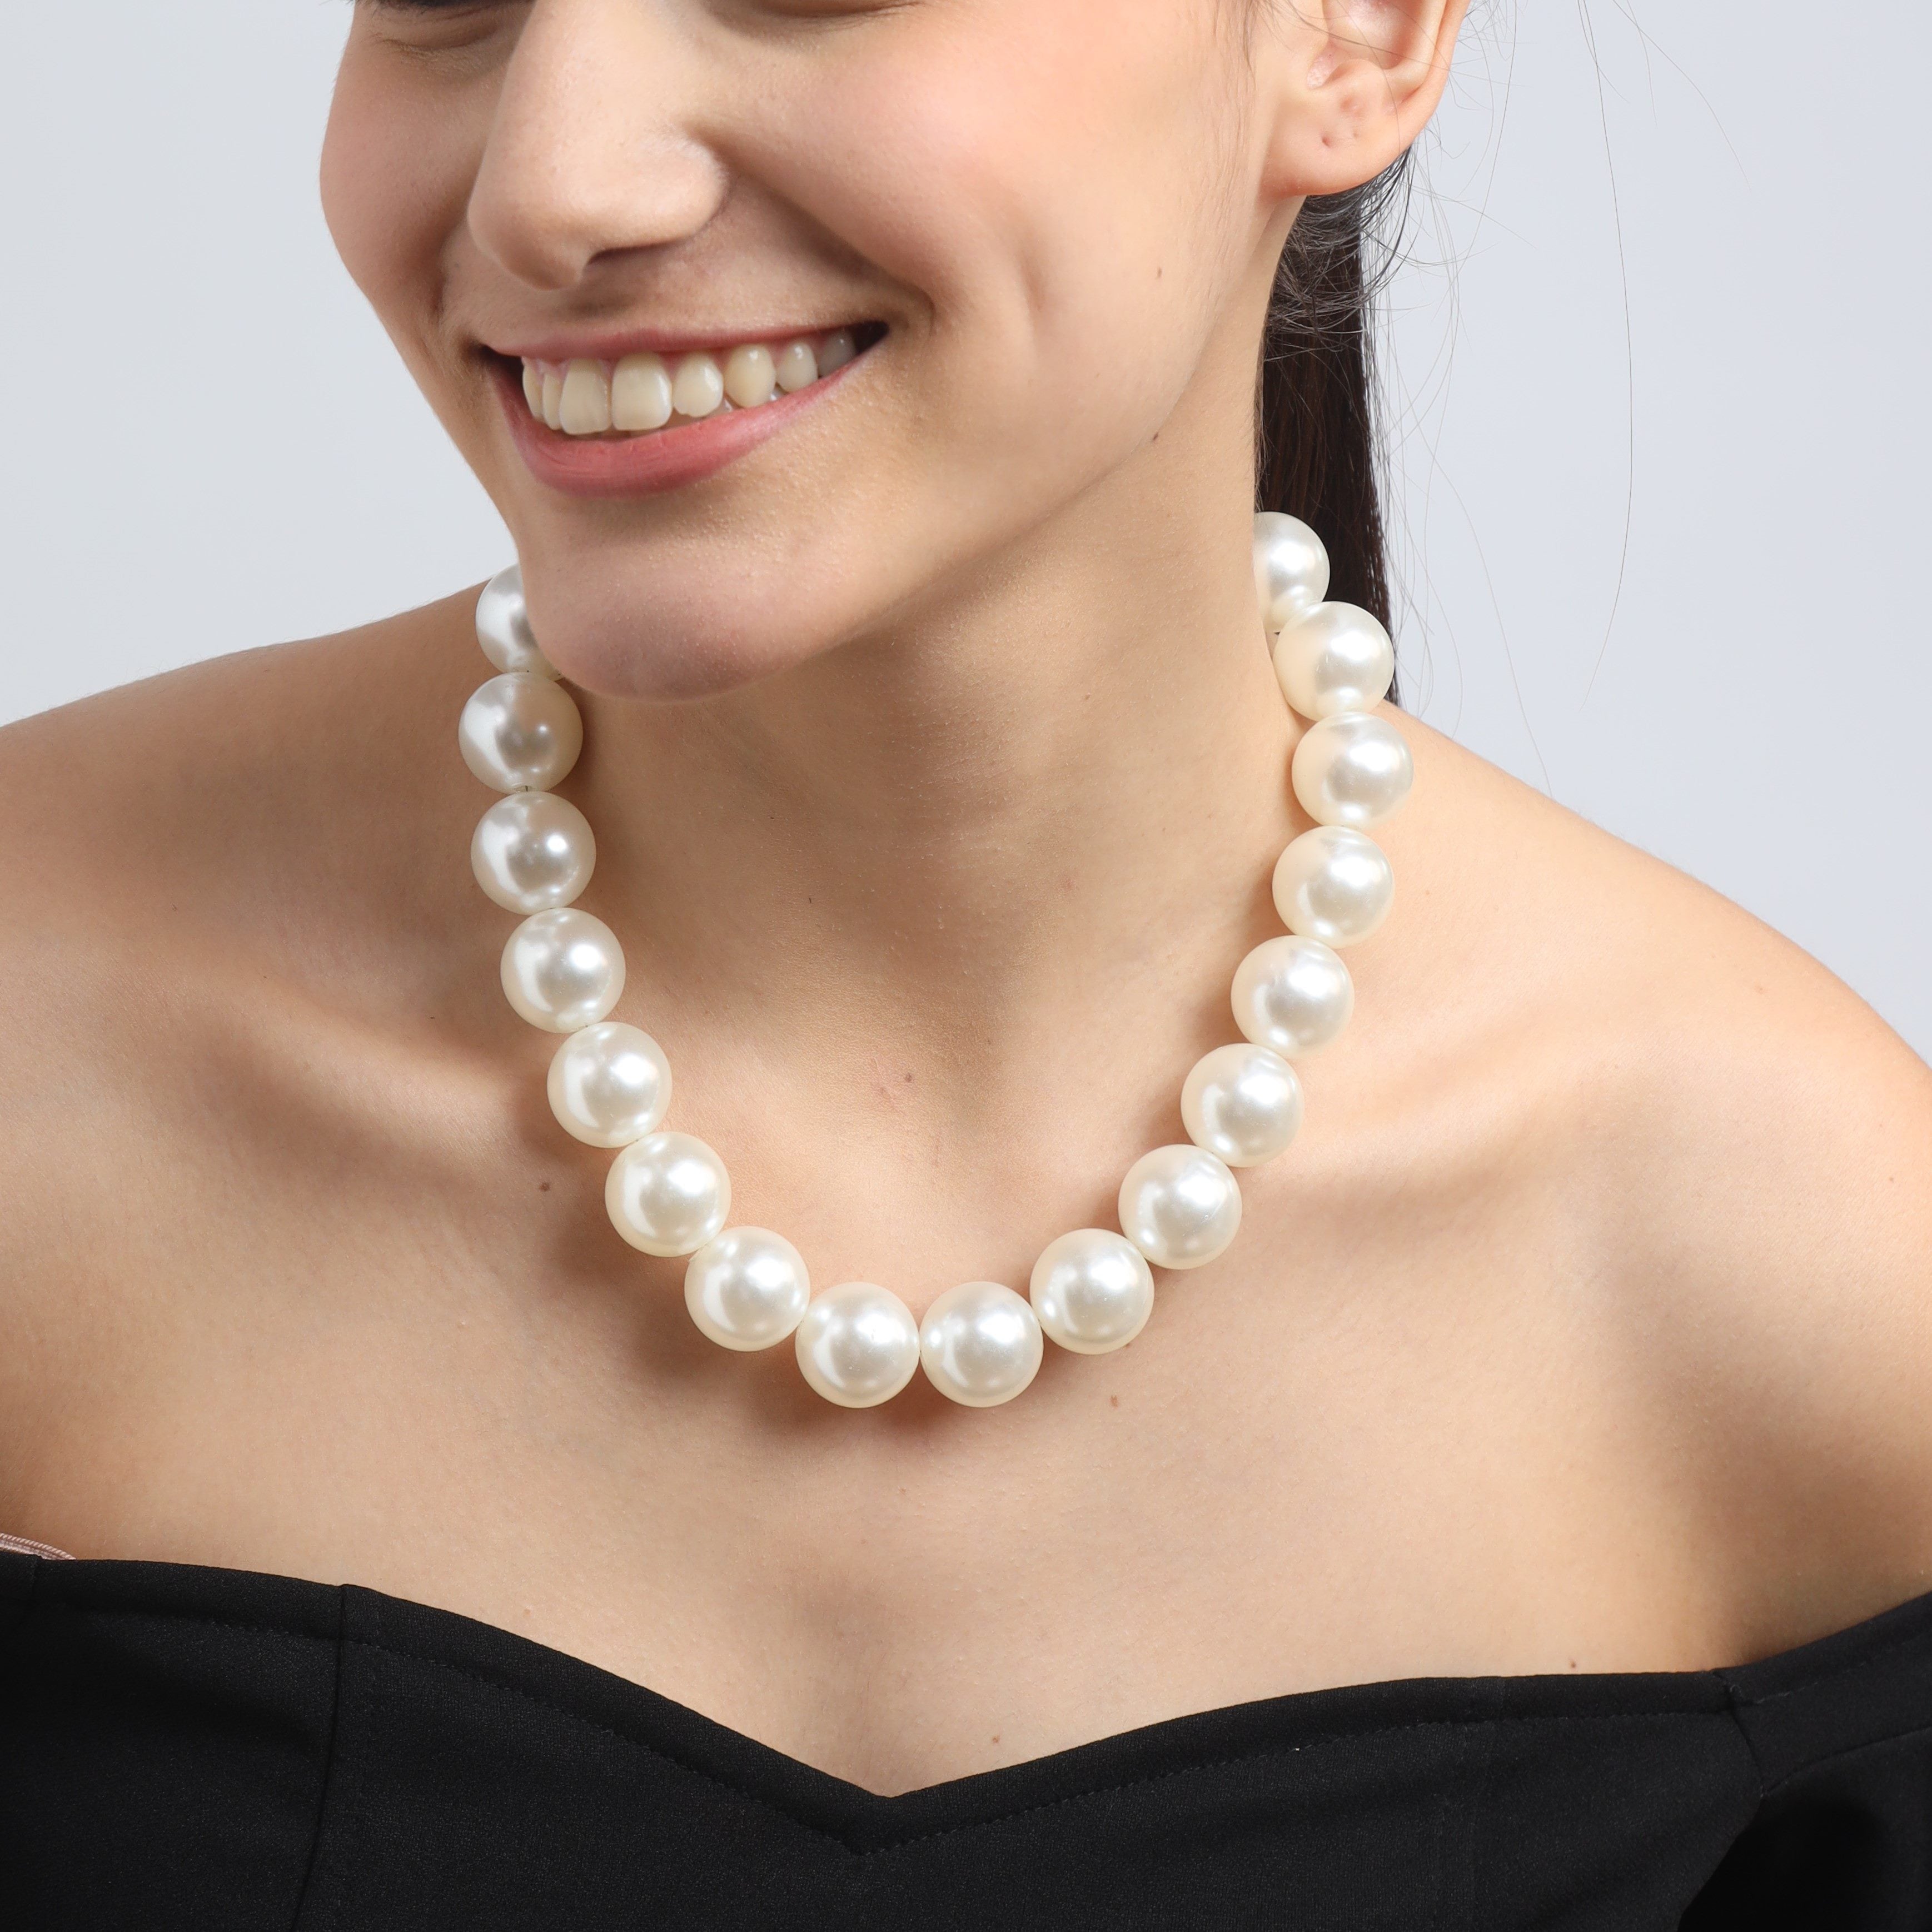 TFC Adorn Big Bold Pearl Beads Statement Necklace